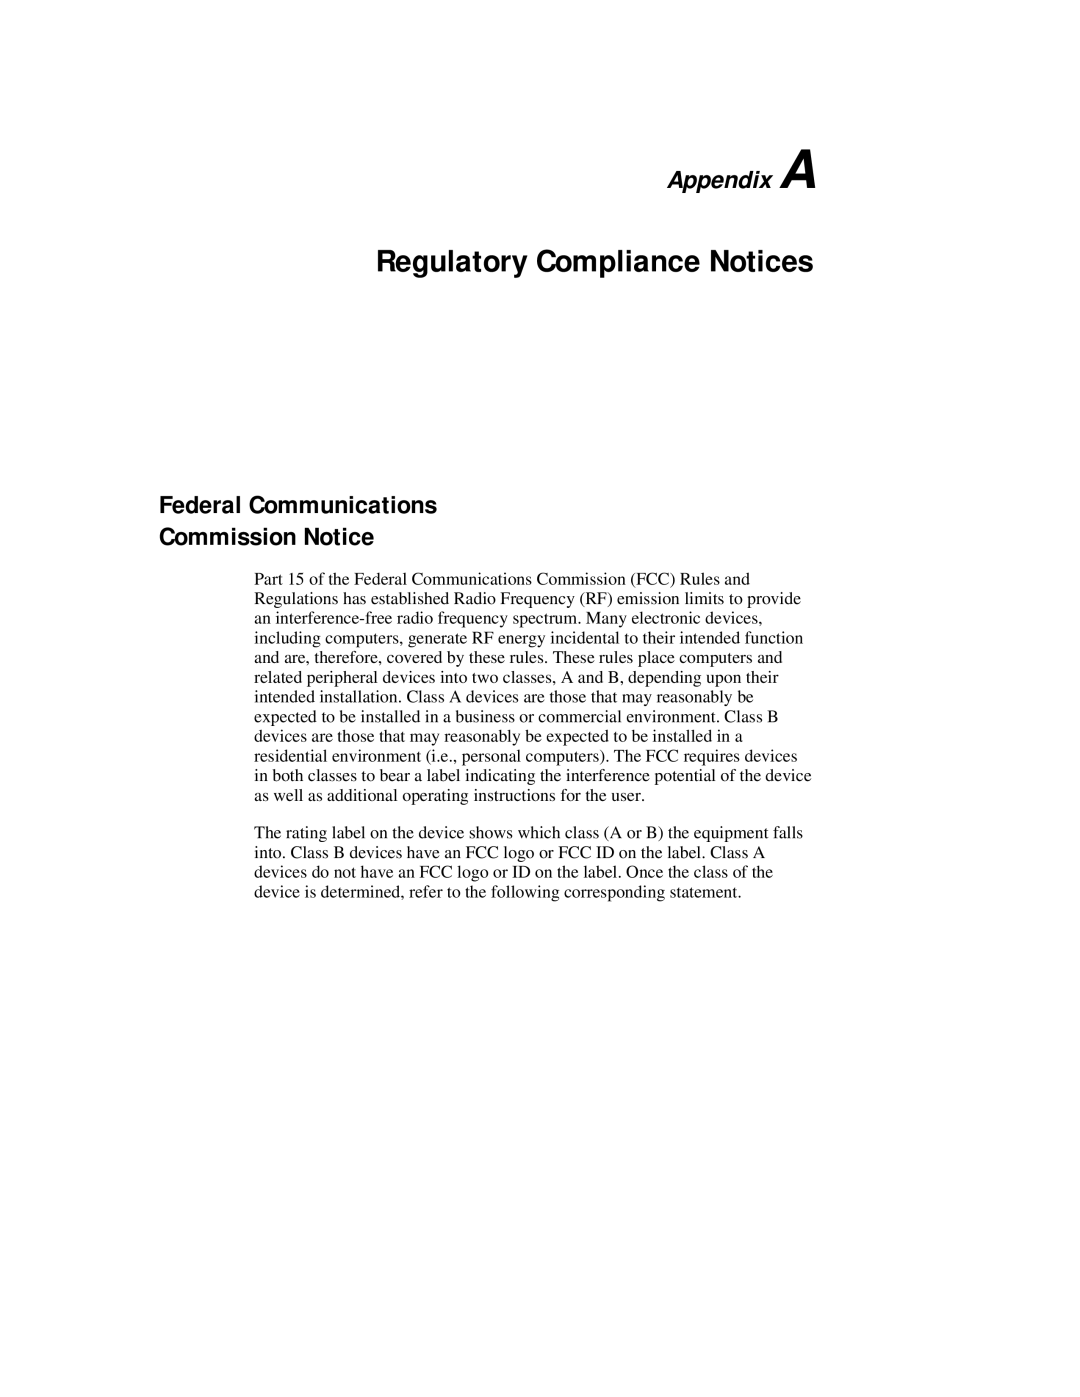 Compaq R6000 Series manual Regulatory Compliance Notices, Appendix A, Federal Communications Commission Notice 